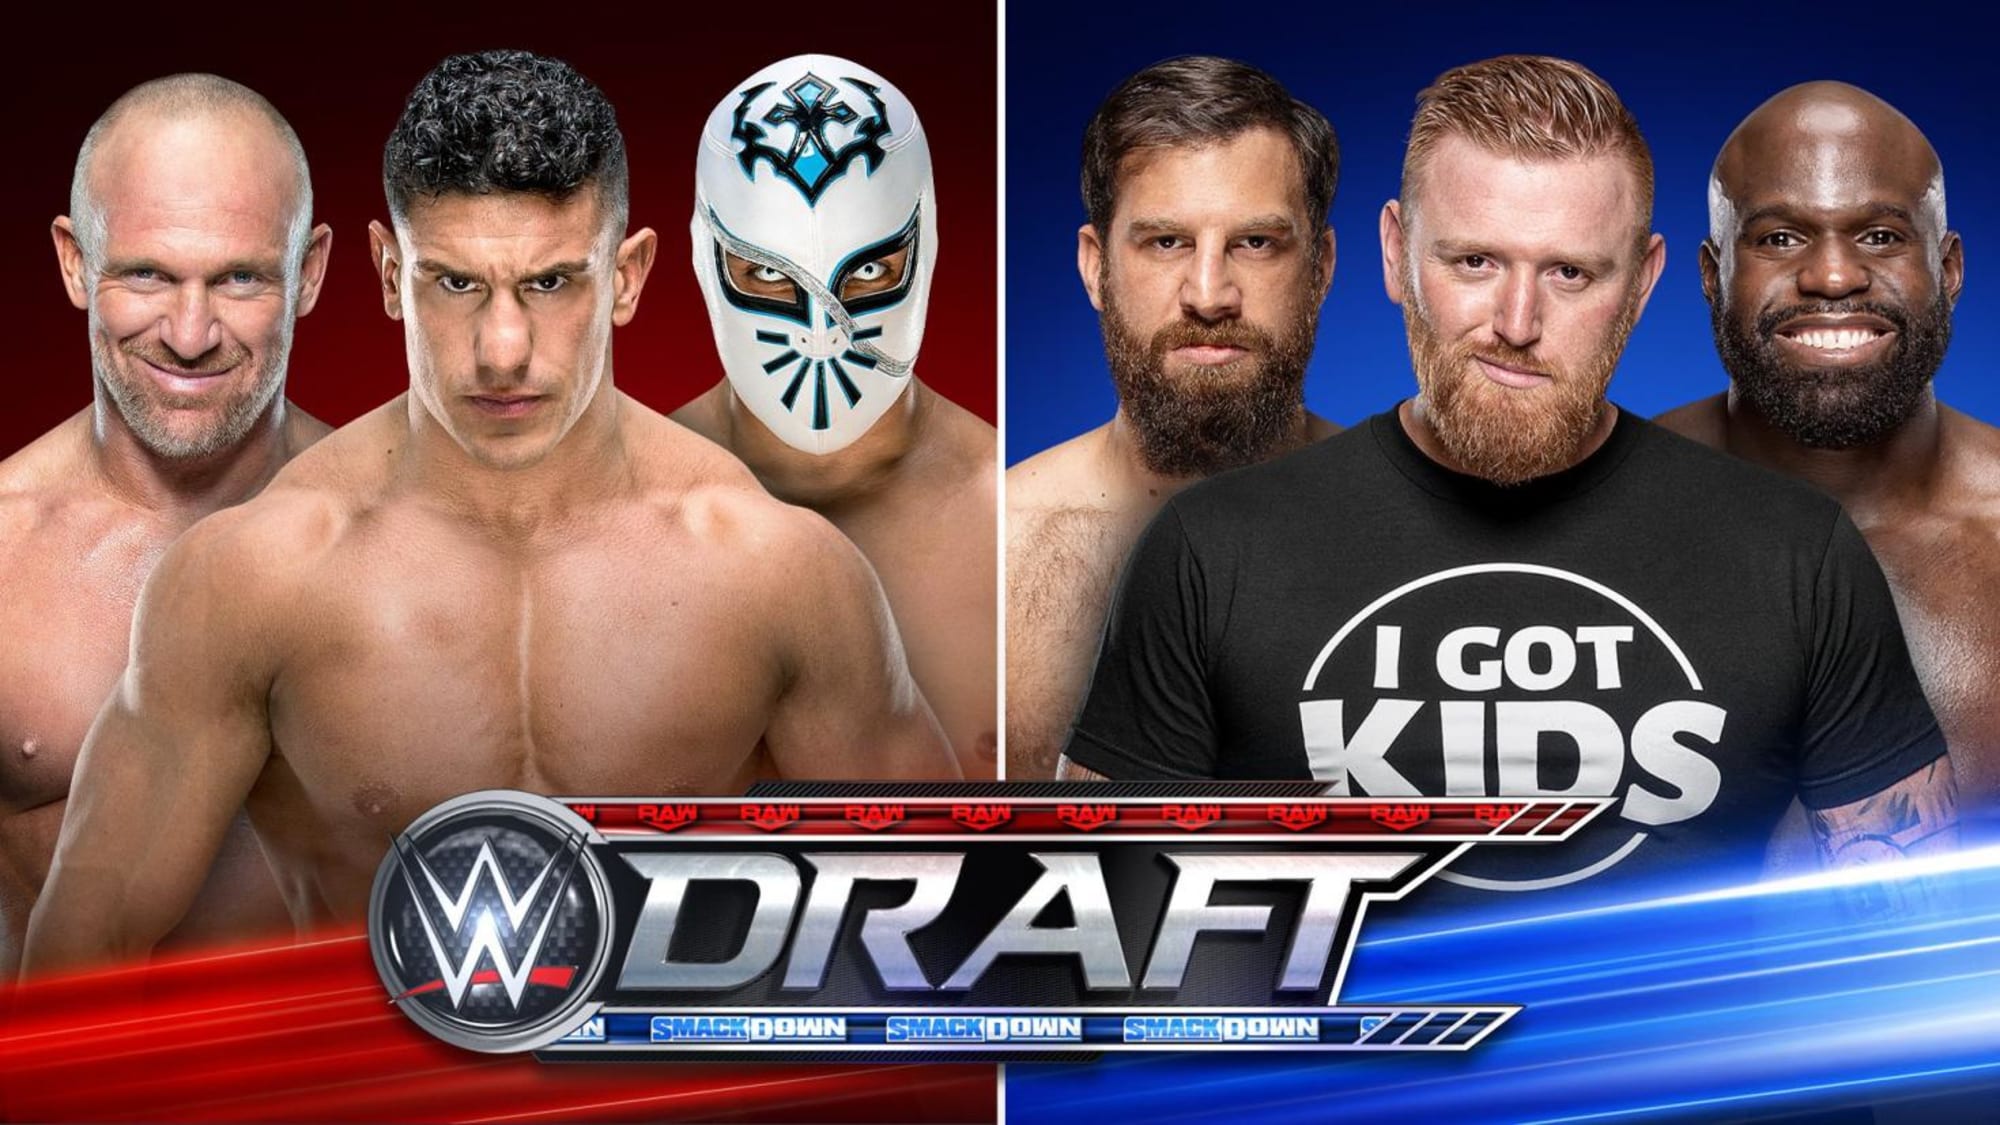 Wwe Announces More Draft Picks For Raw Smackdown